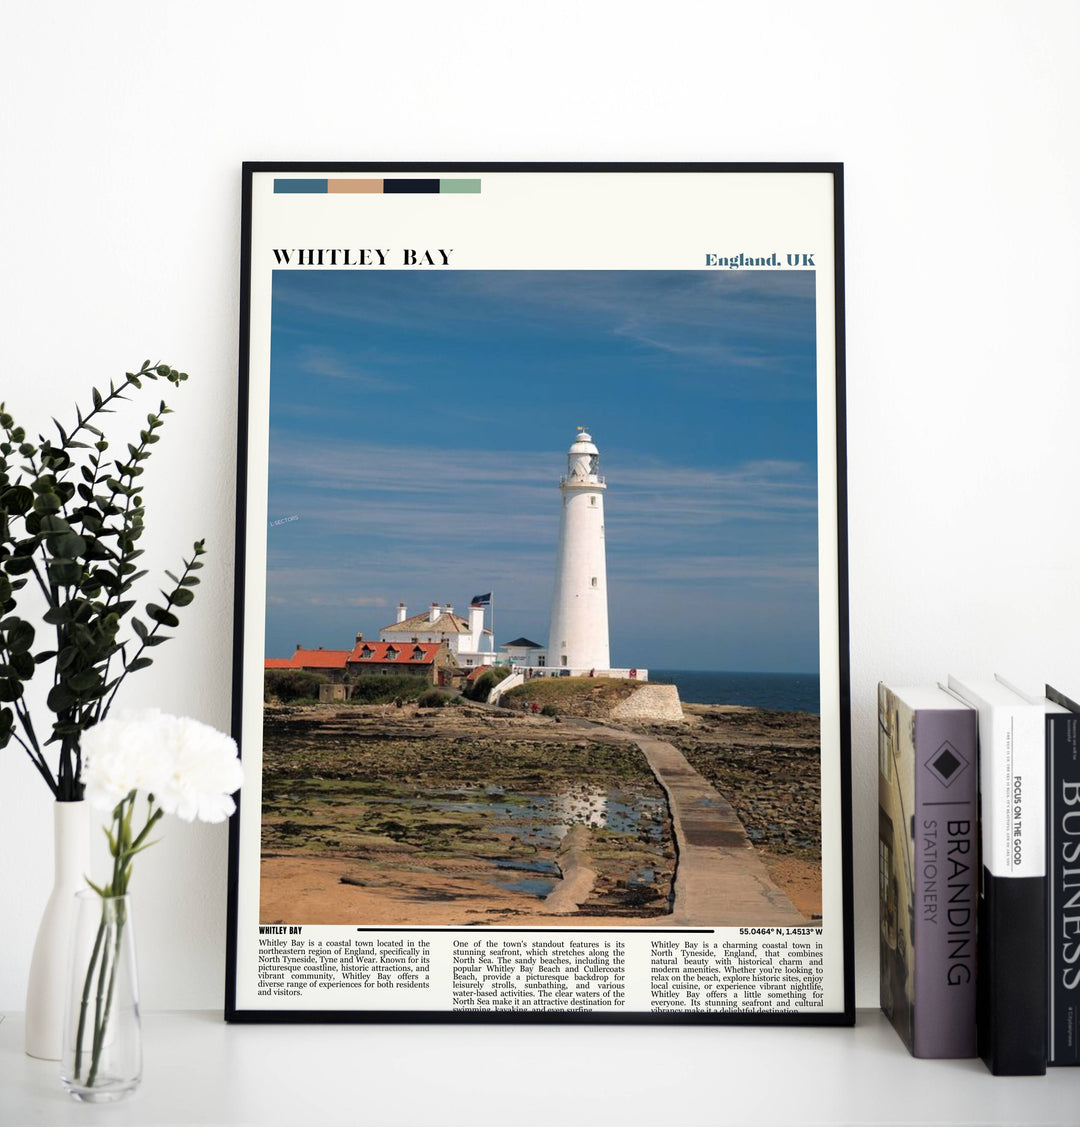 English travel print featuring the iconic landmarks of Newcastle Upon Tyne and Cullercoats